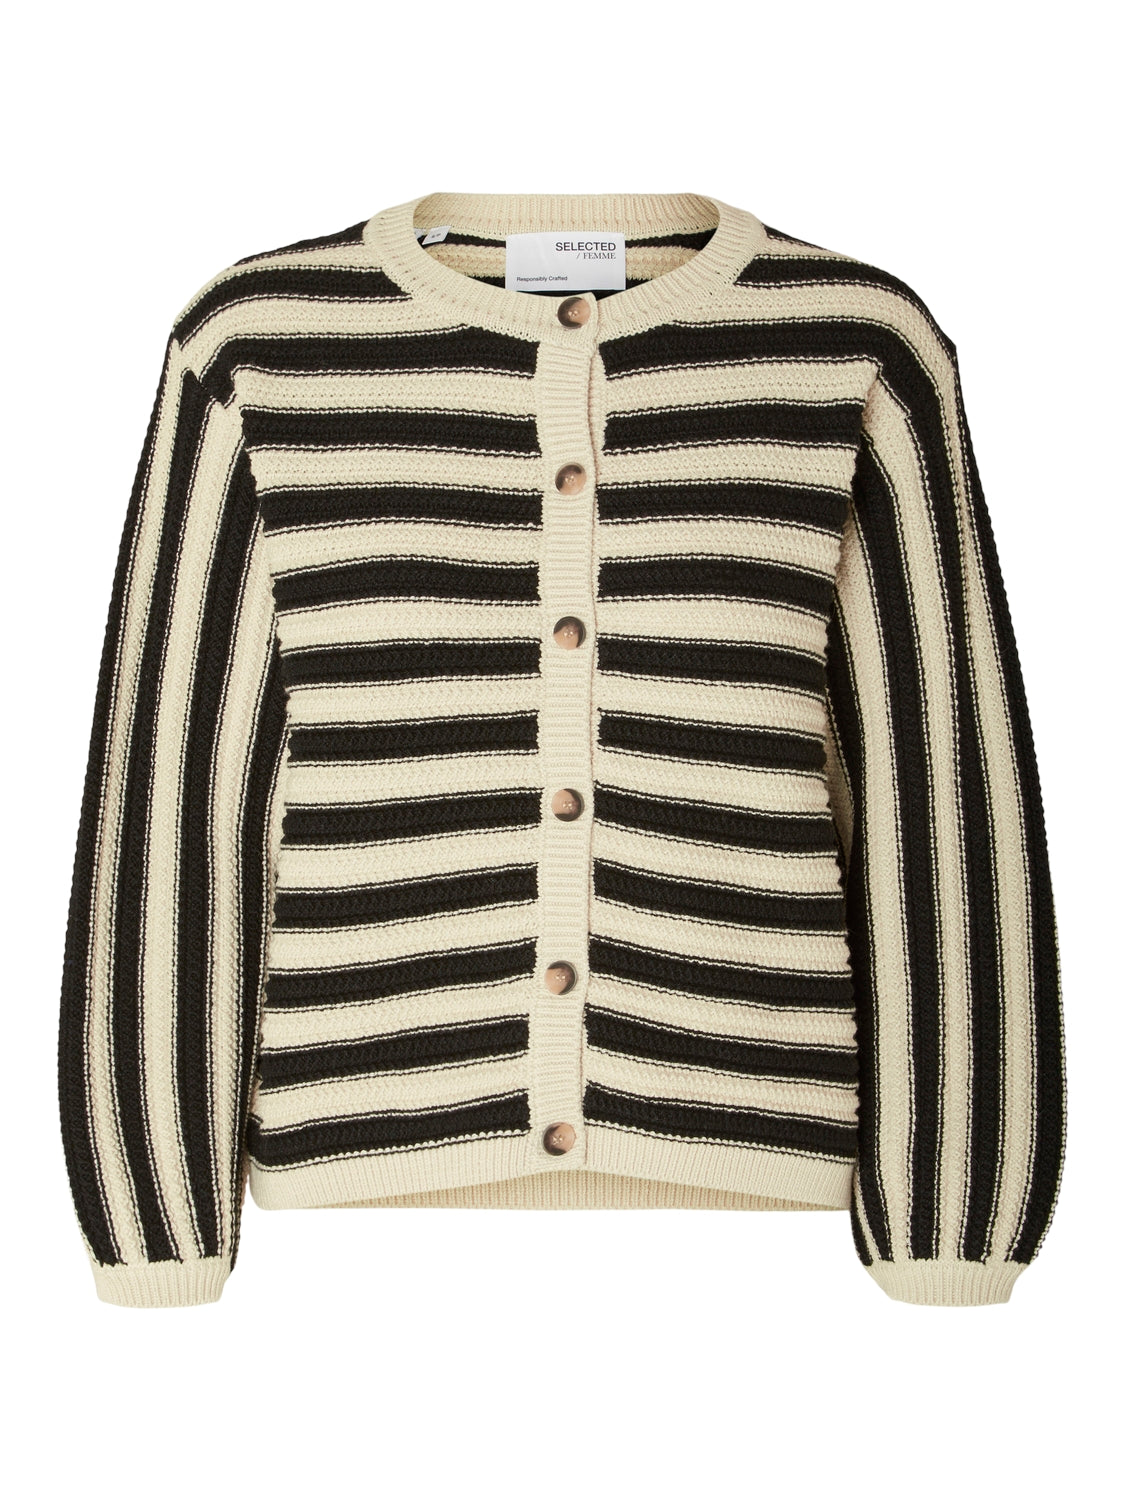 Selected Femme Striped Knitted Cardigan